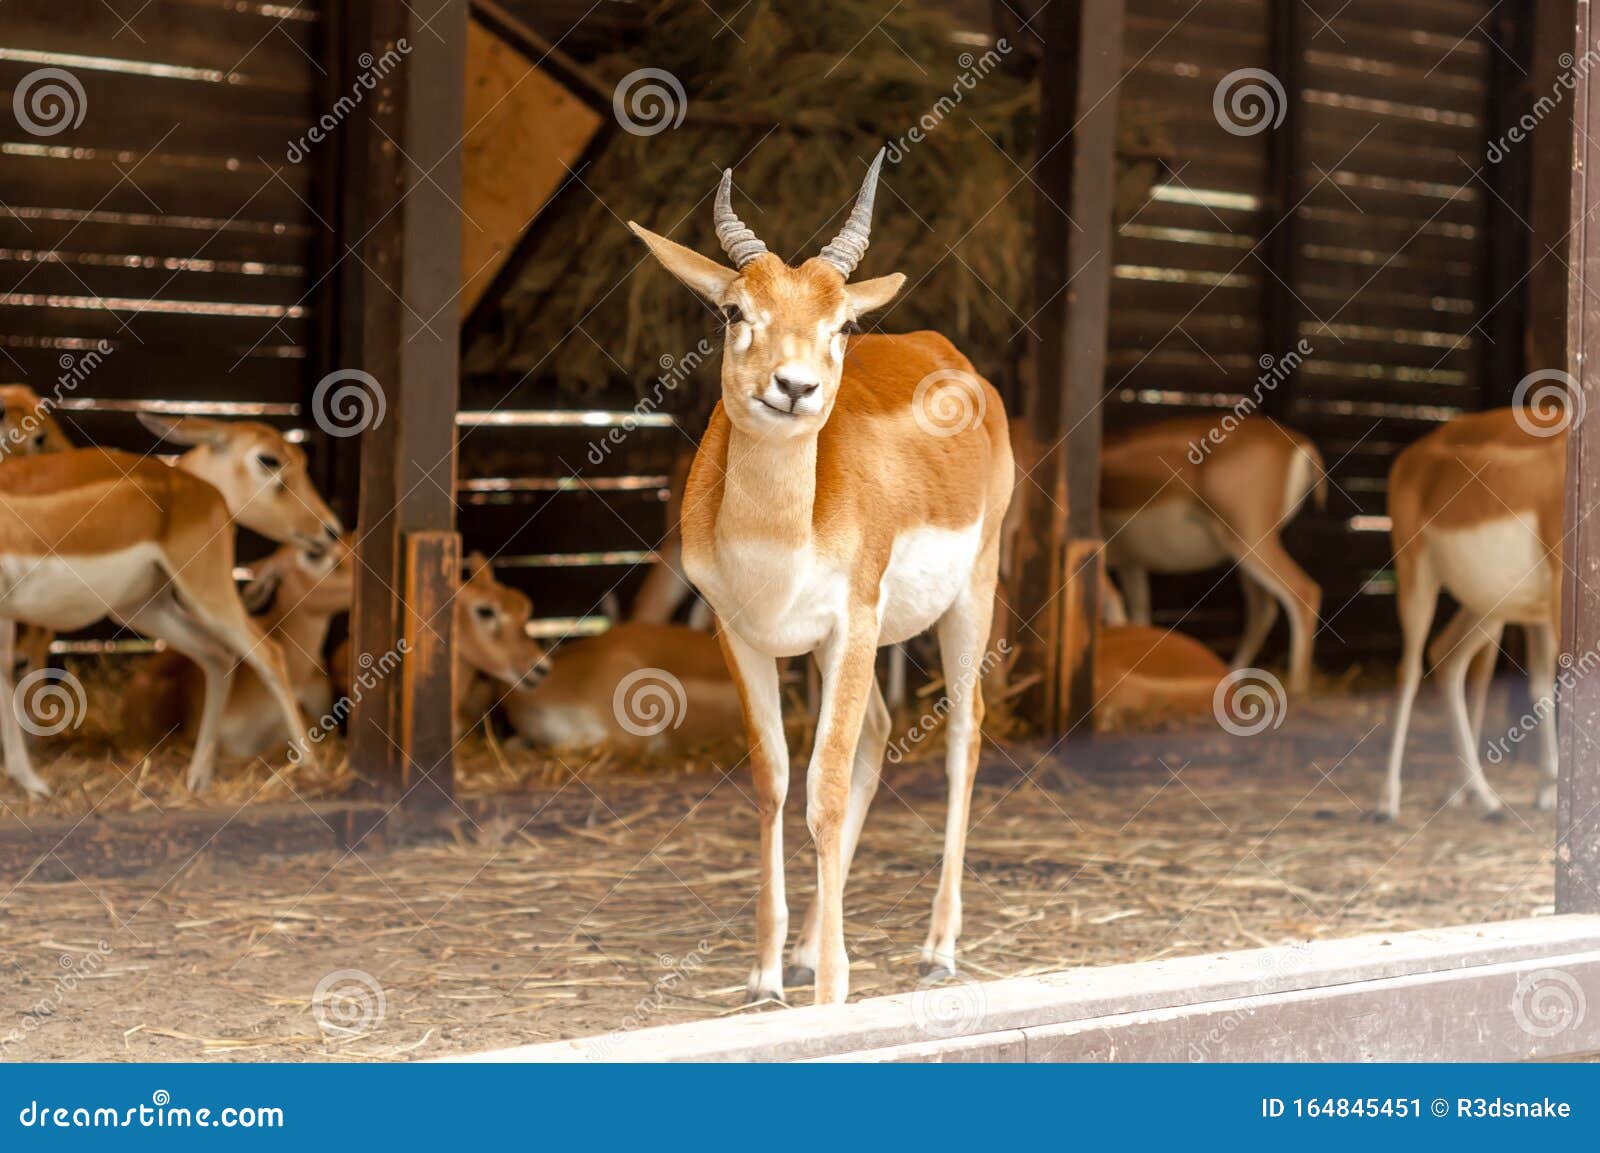 portrait of a blackbuck antilope in a zoo while yawning